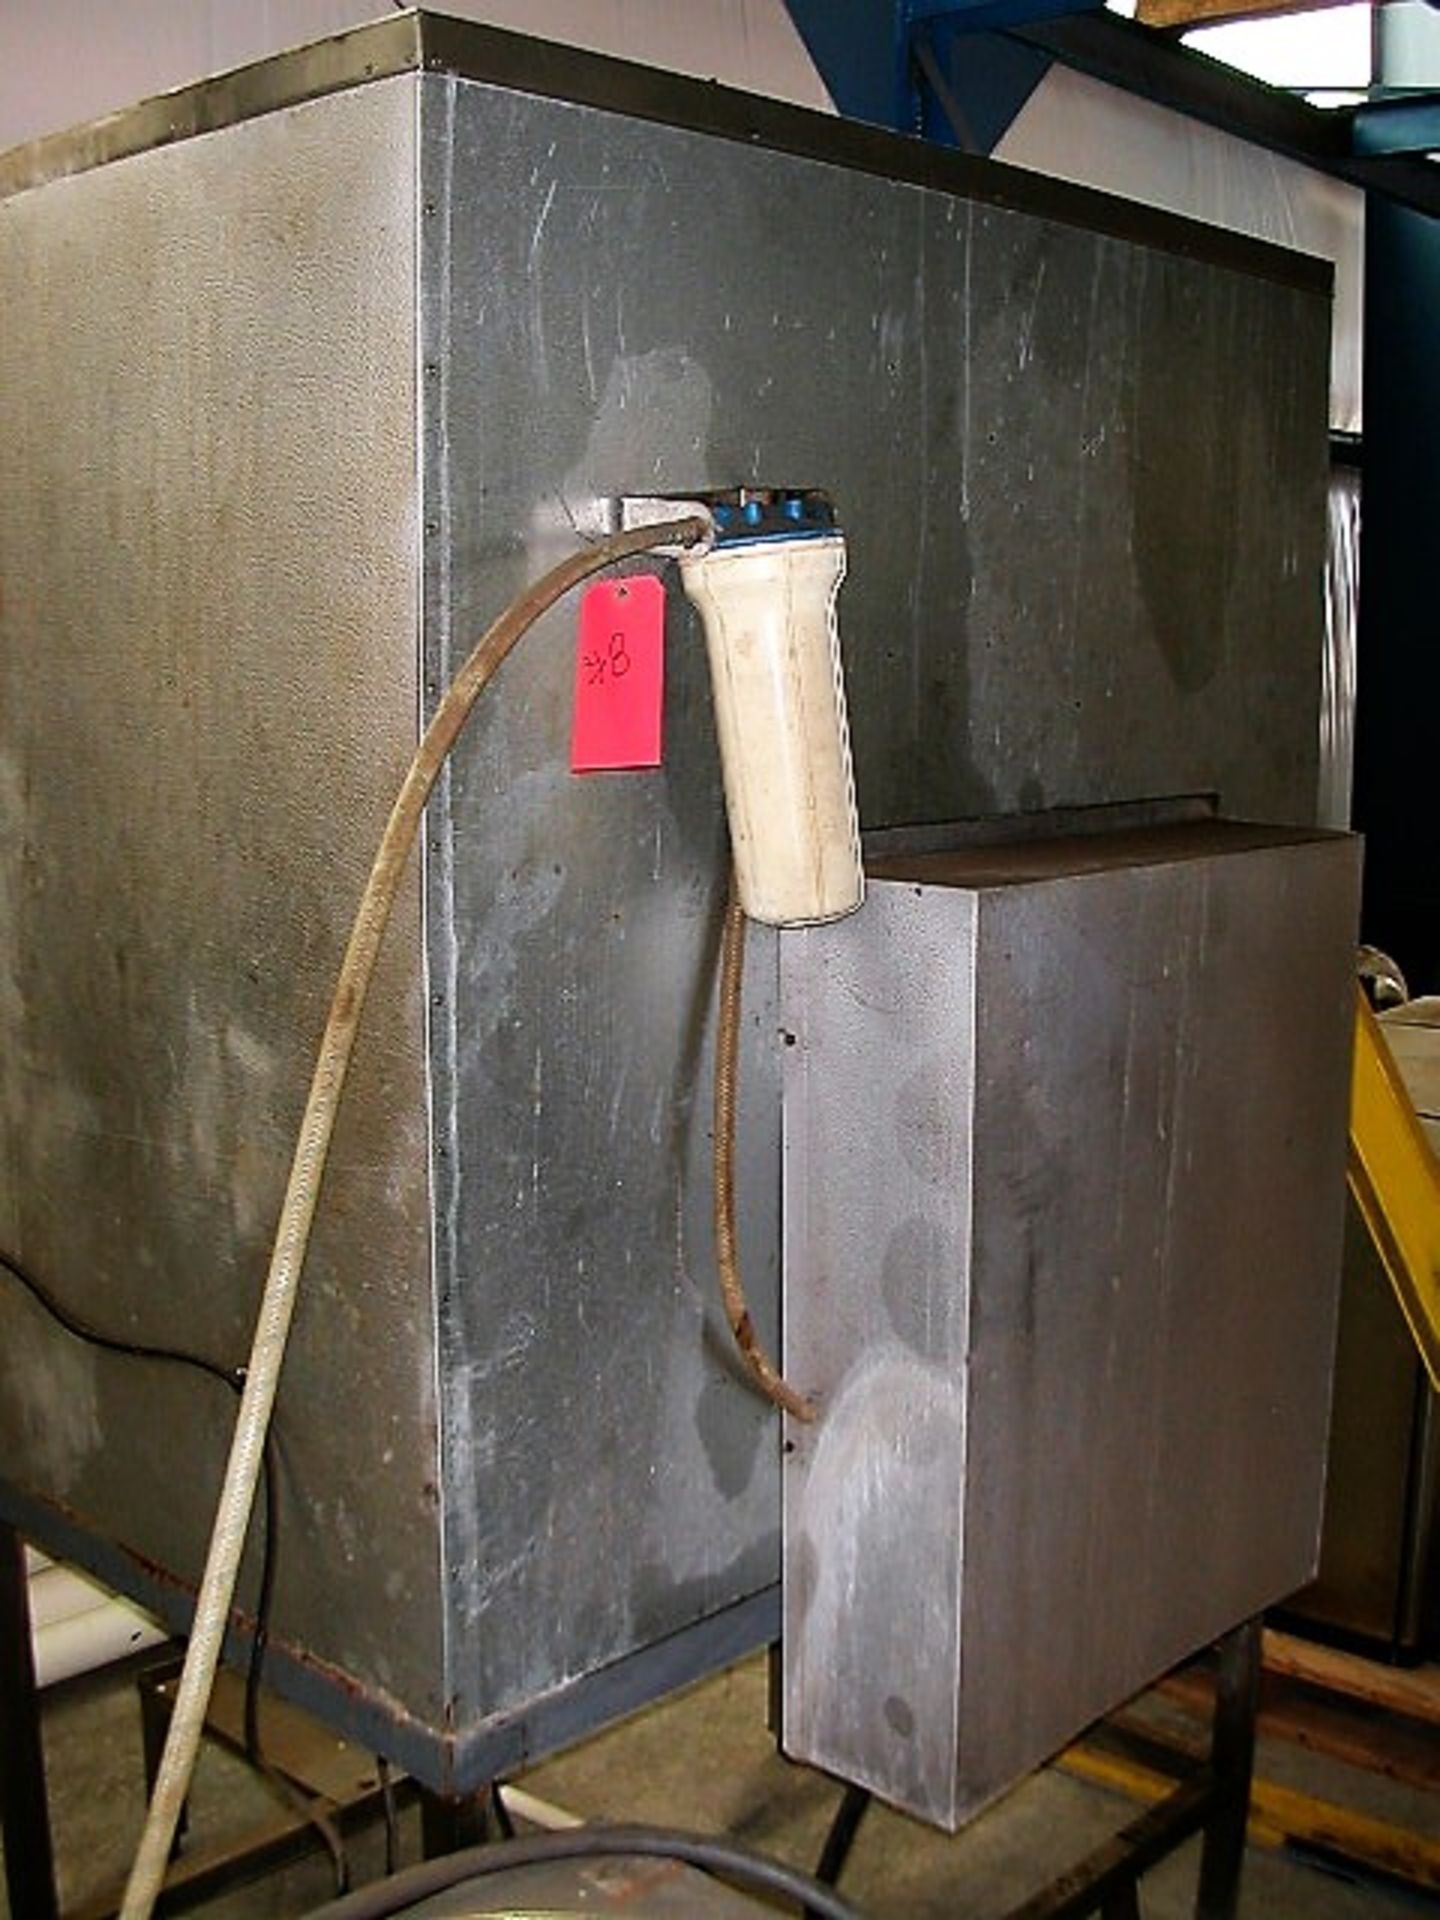 Large Capacity SS Commercial Ice Maker & Storage Unit - Image 5 of 6